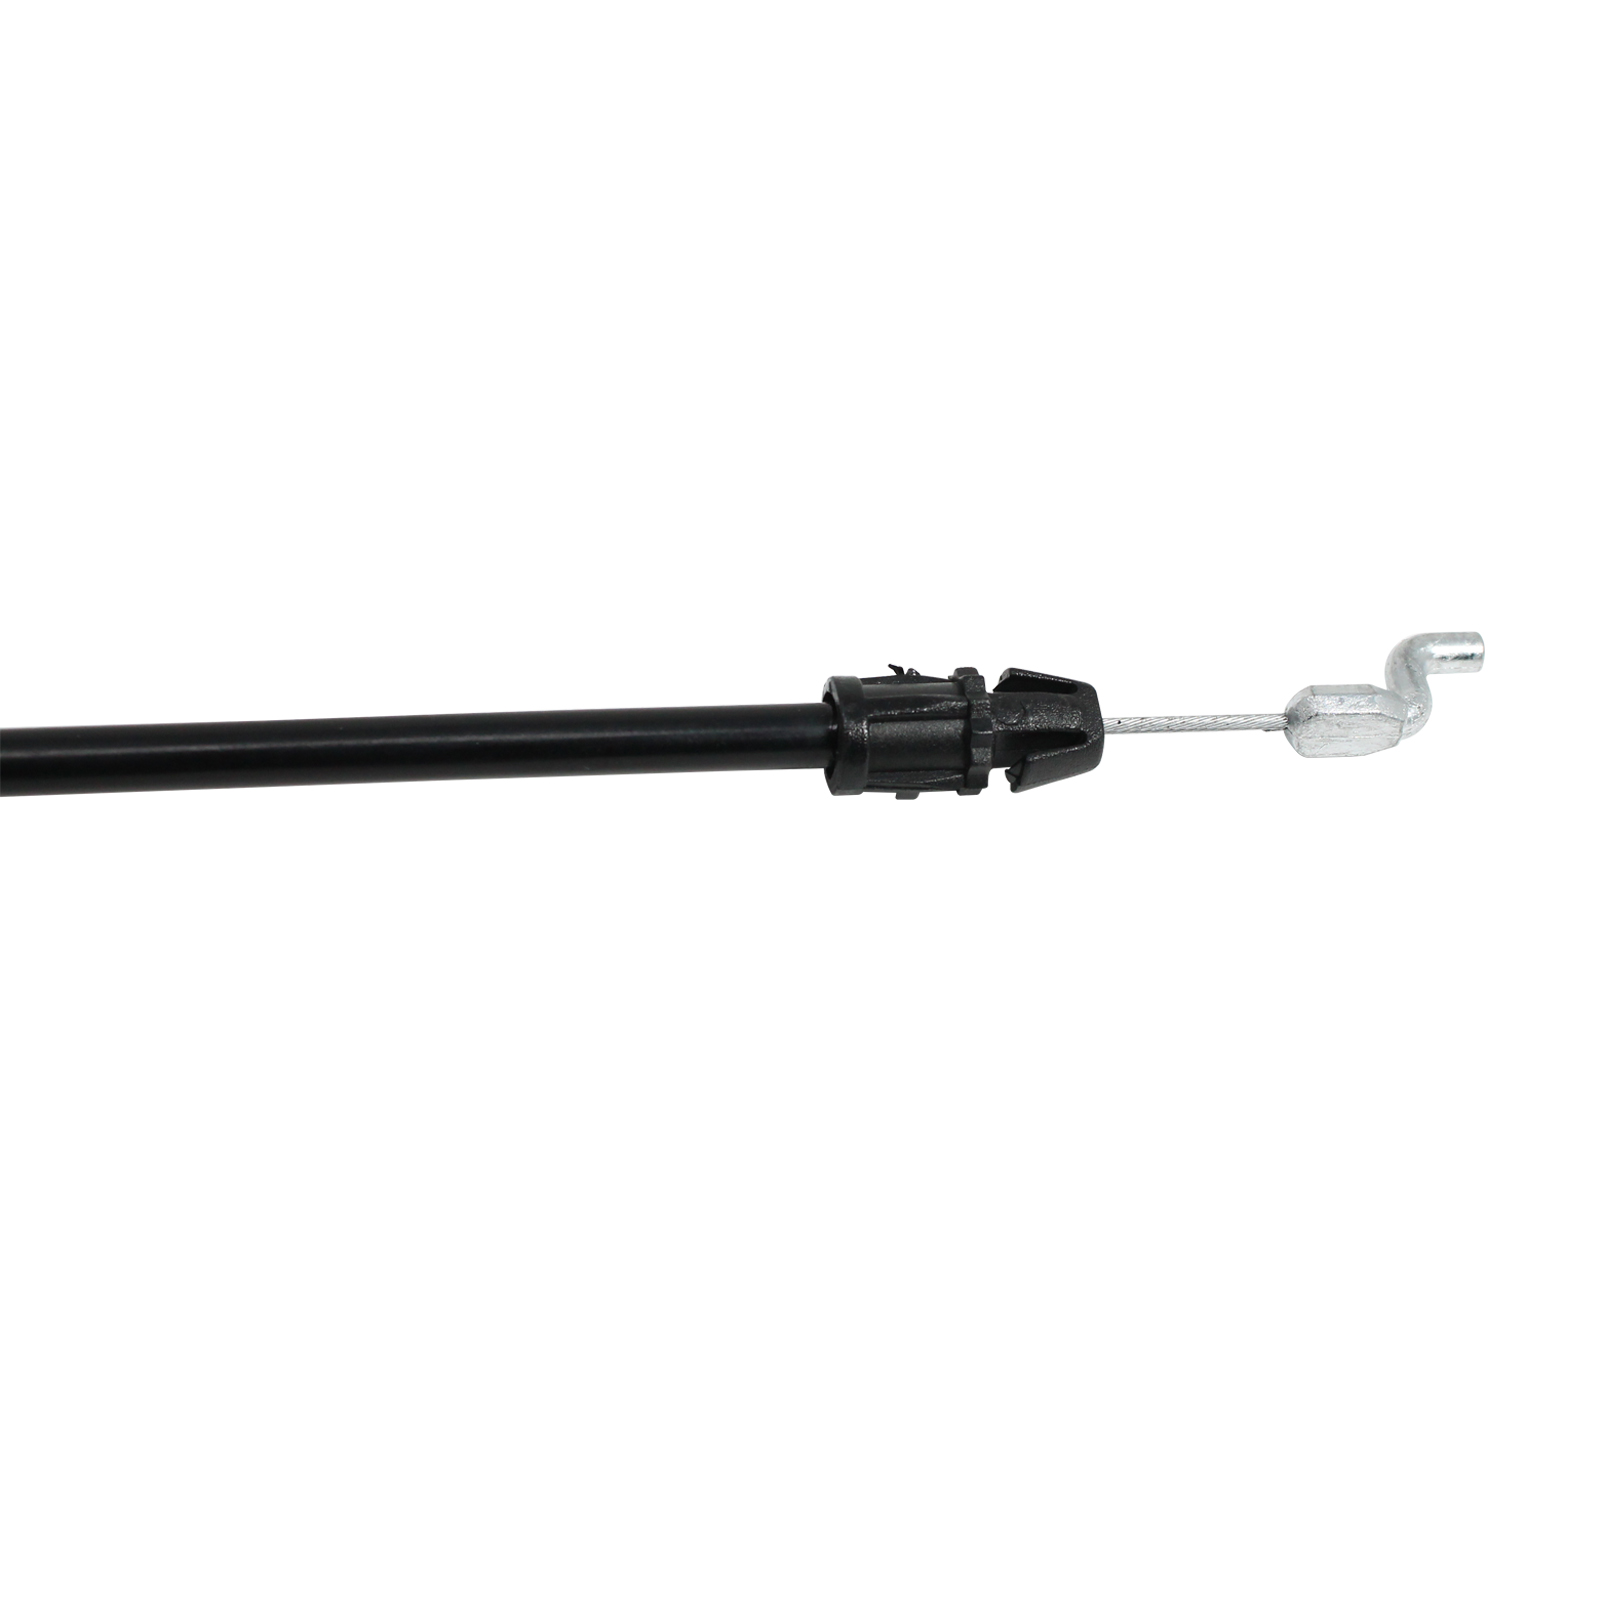 532176556 Engine Cable Replacement for Husqvarna ROTARY LAWN MOWER (96114000701) (2007-01) Lawn Mower: Consumer Walk Behind - Compatible with 176556 162778 Zone Control Cable - image 3 of 4